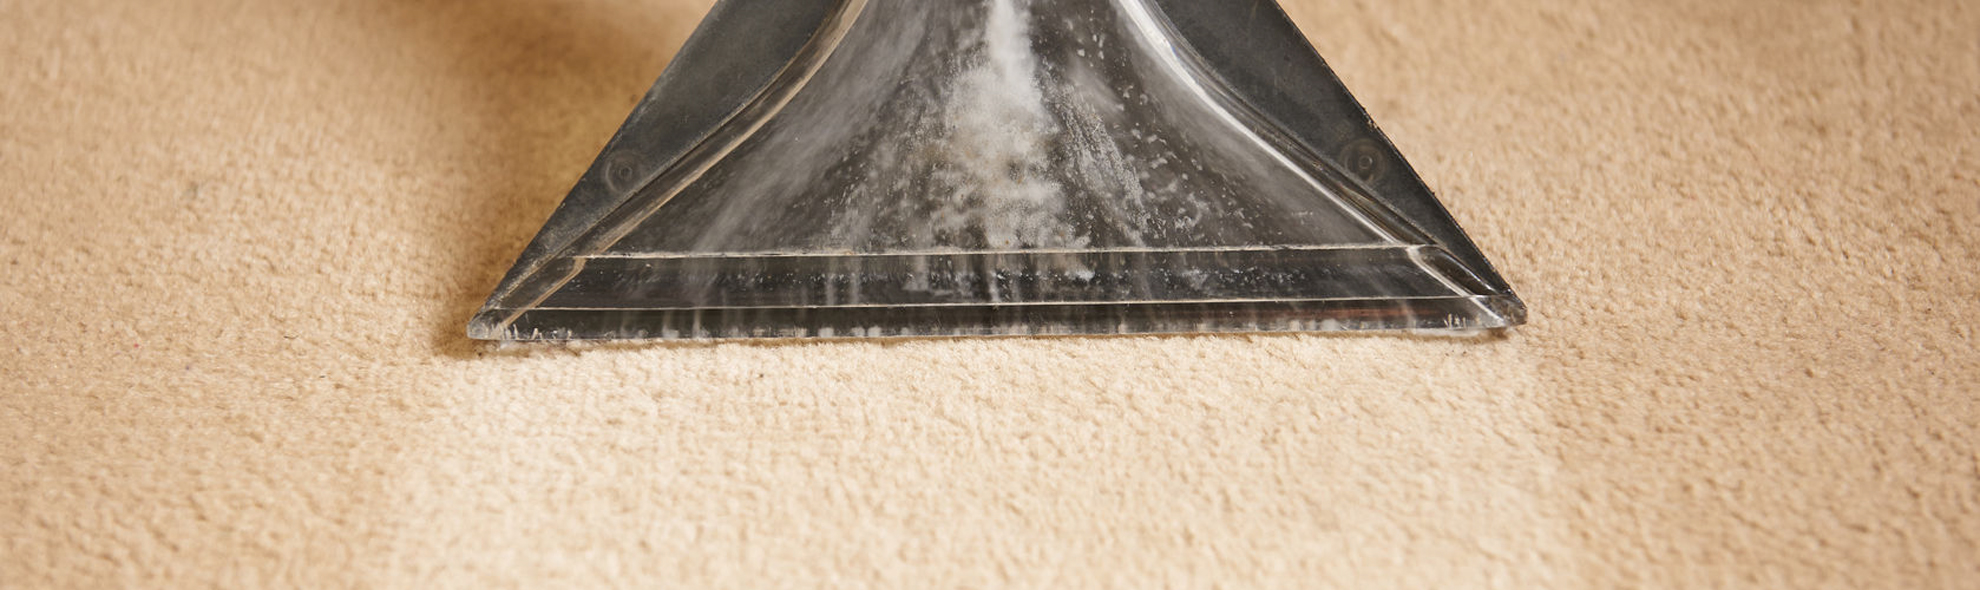 Professional Carpet Cleaning in Melbourne